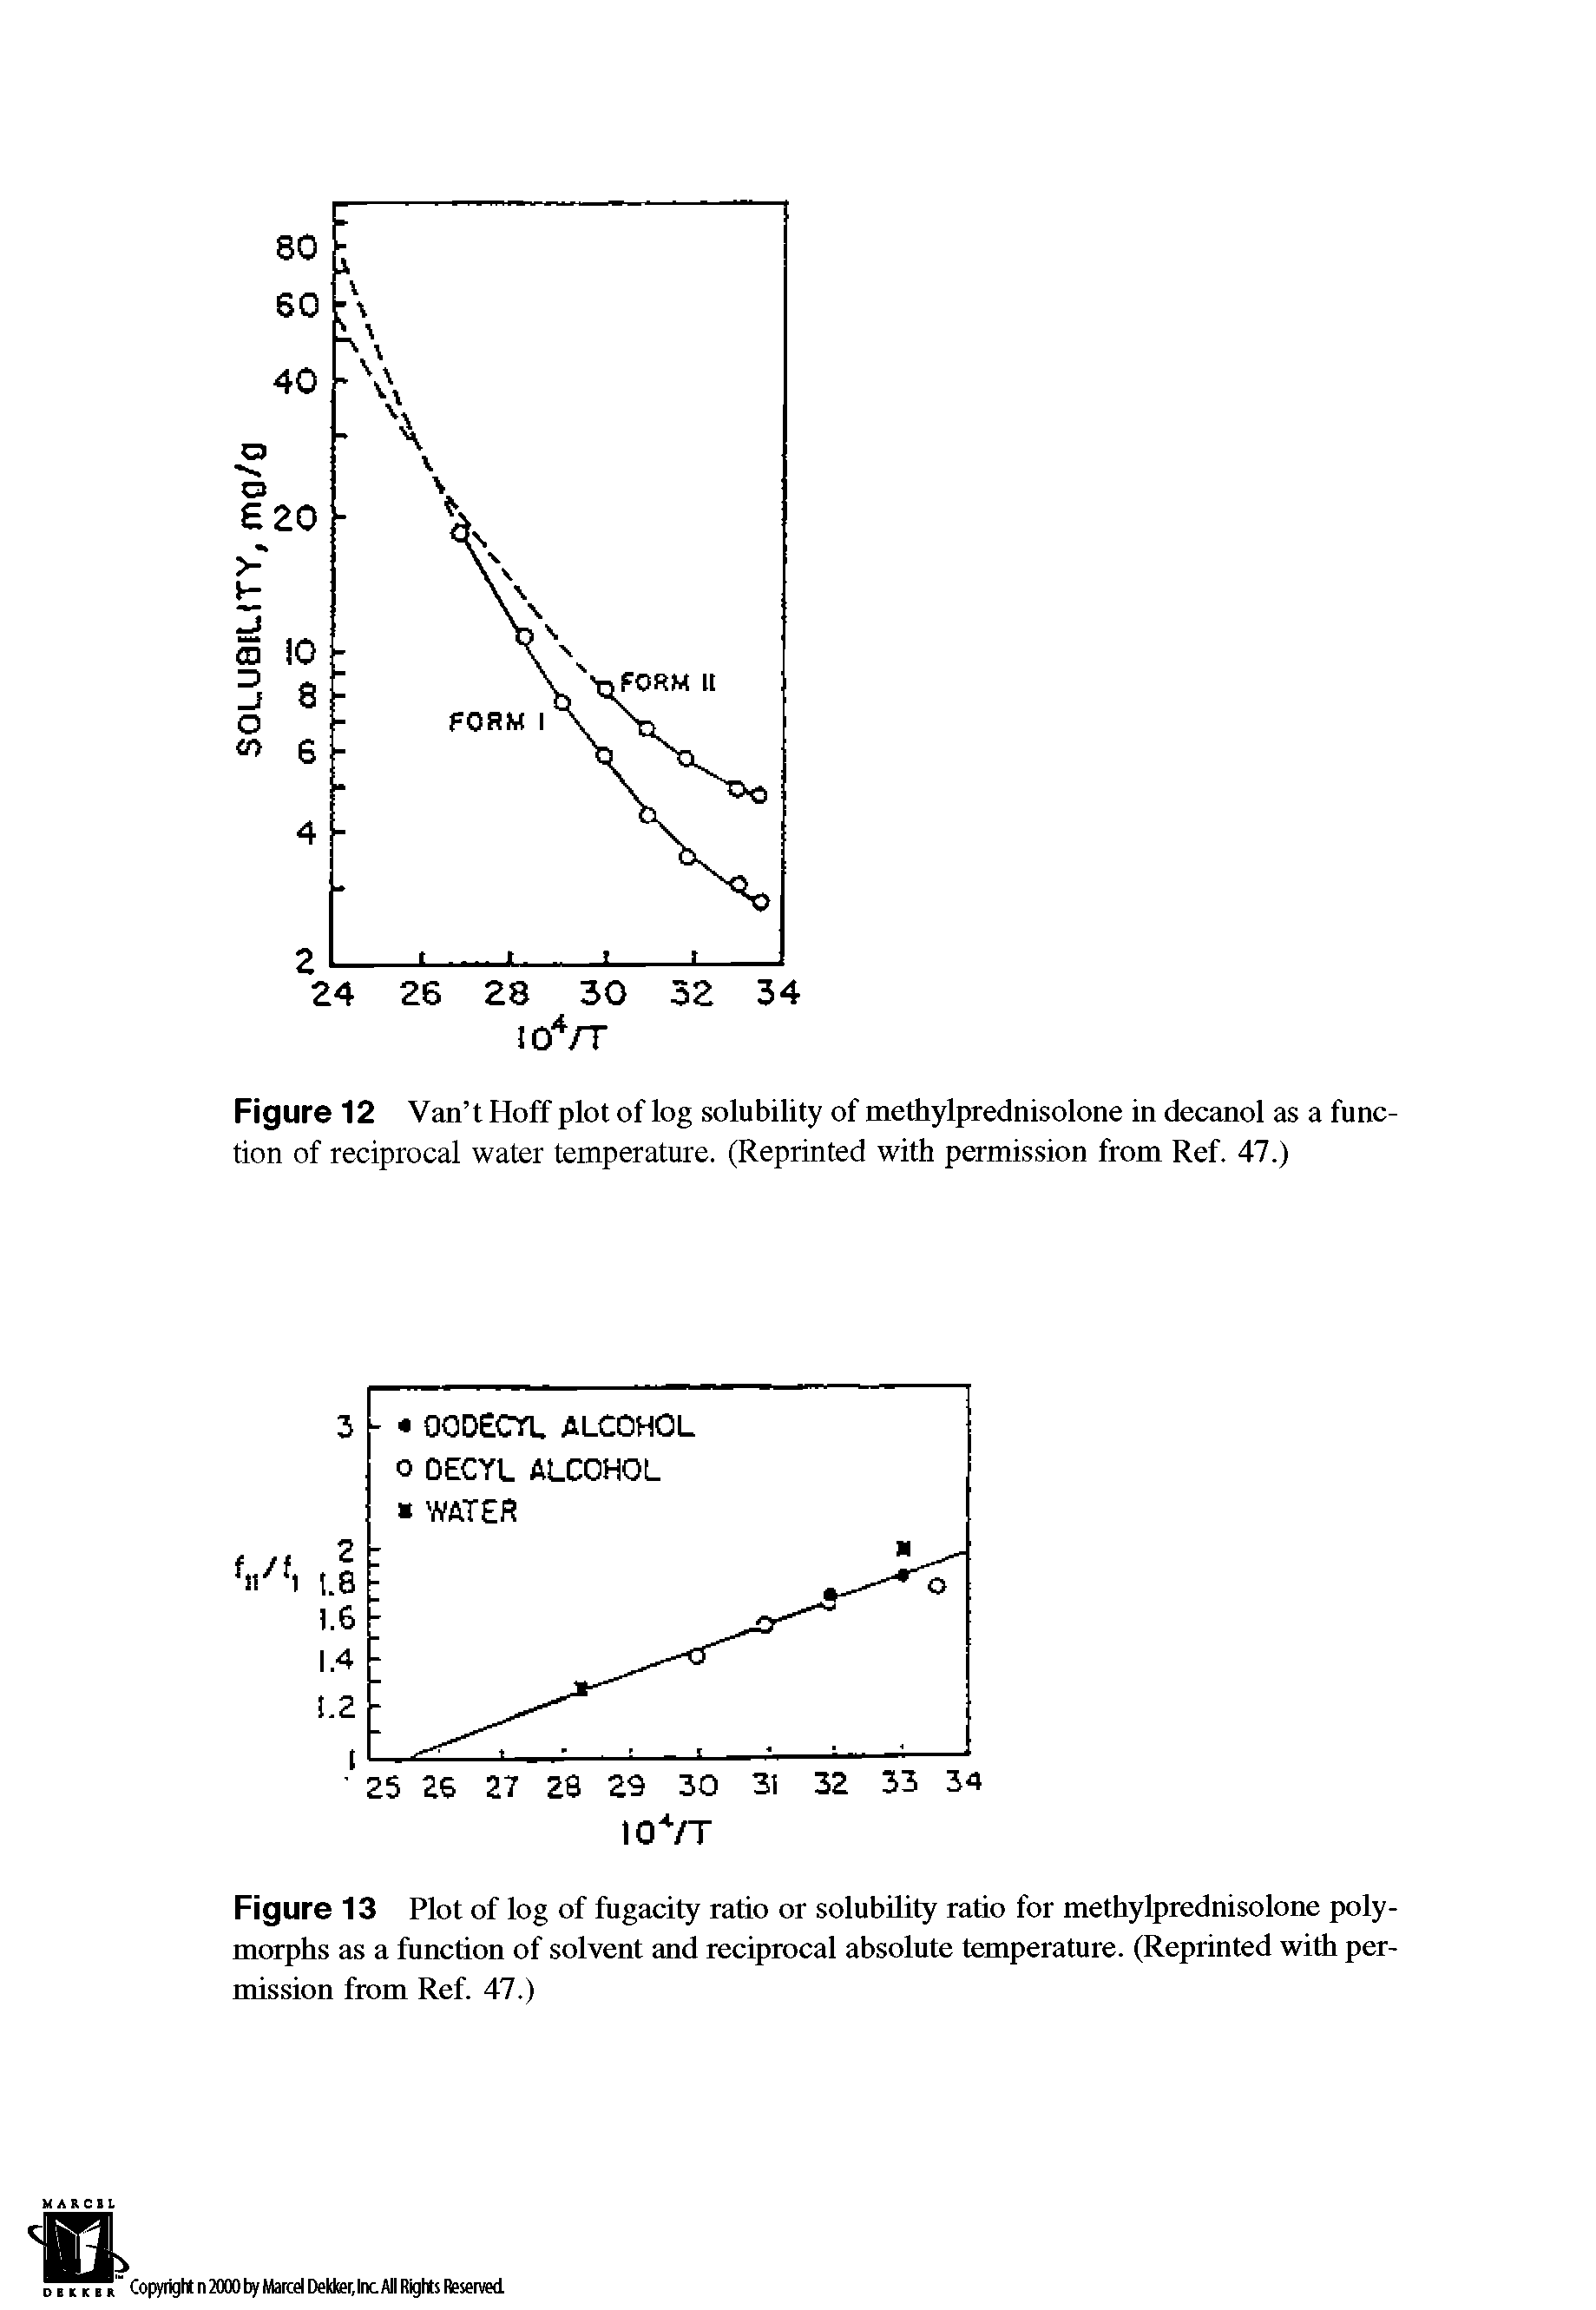 Figure 13 Plot of log of fugacity ratio or solubility ratio for methylprednisolone polymorphs as a function of solvent and reciprocal absolute temperature. (Reprinted with permission from Ref. 47.)...